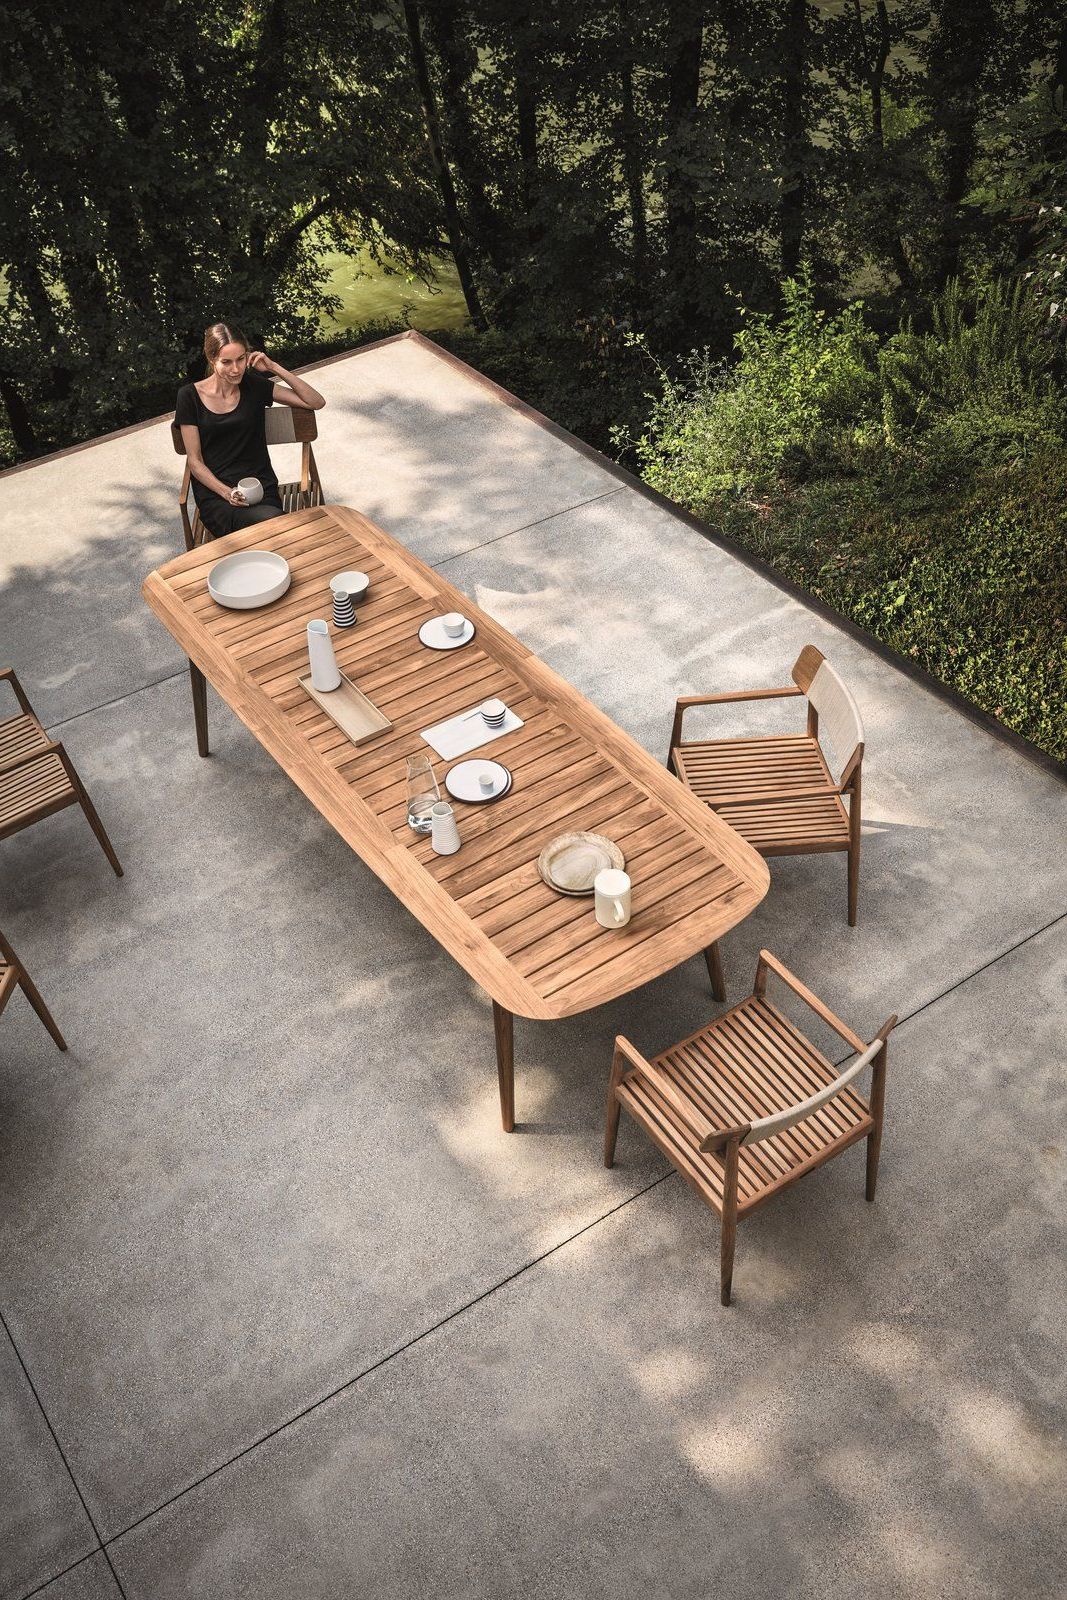 Scandinavian Outdoor Tables Intended For Popular This Teak Outdoor Living Collection Pairs Sustainability And Scandinavian Inspired  Style (View 5 of 15)